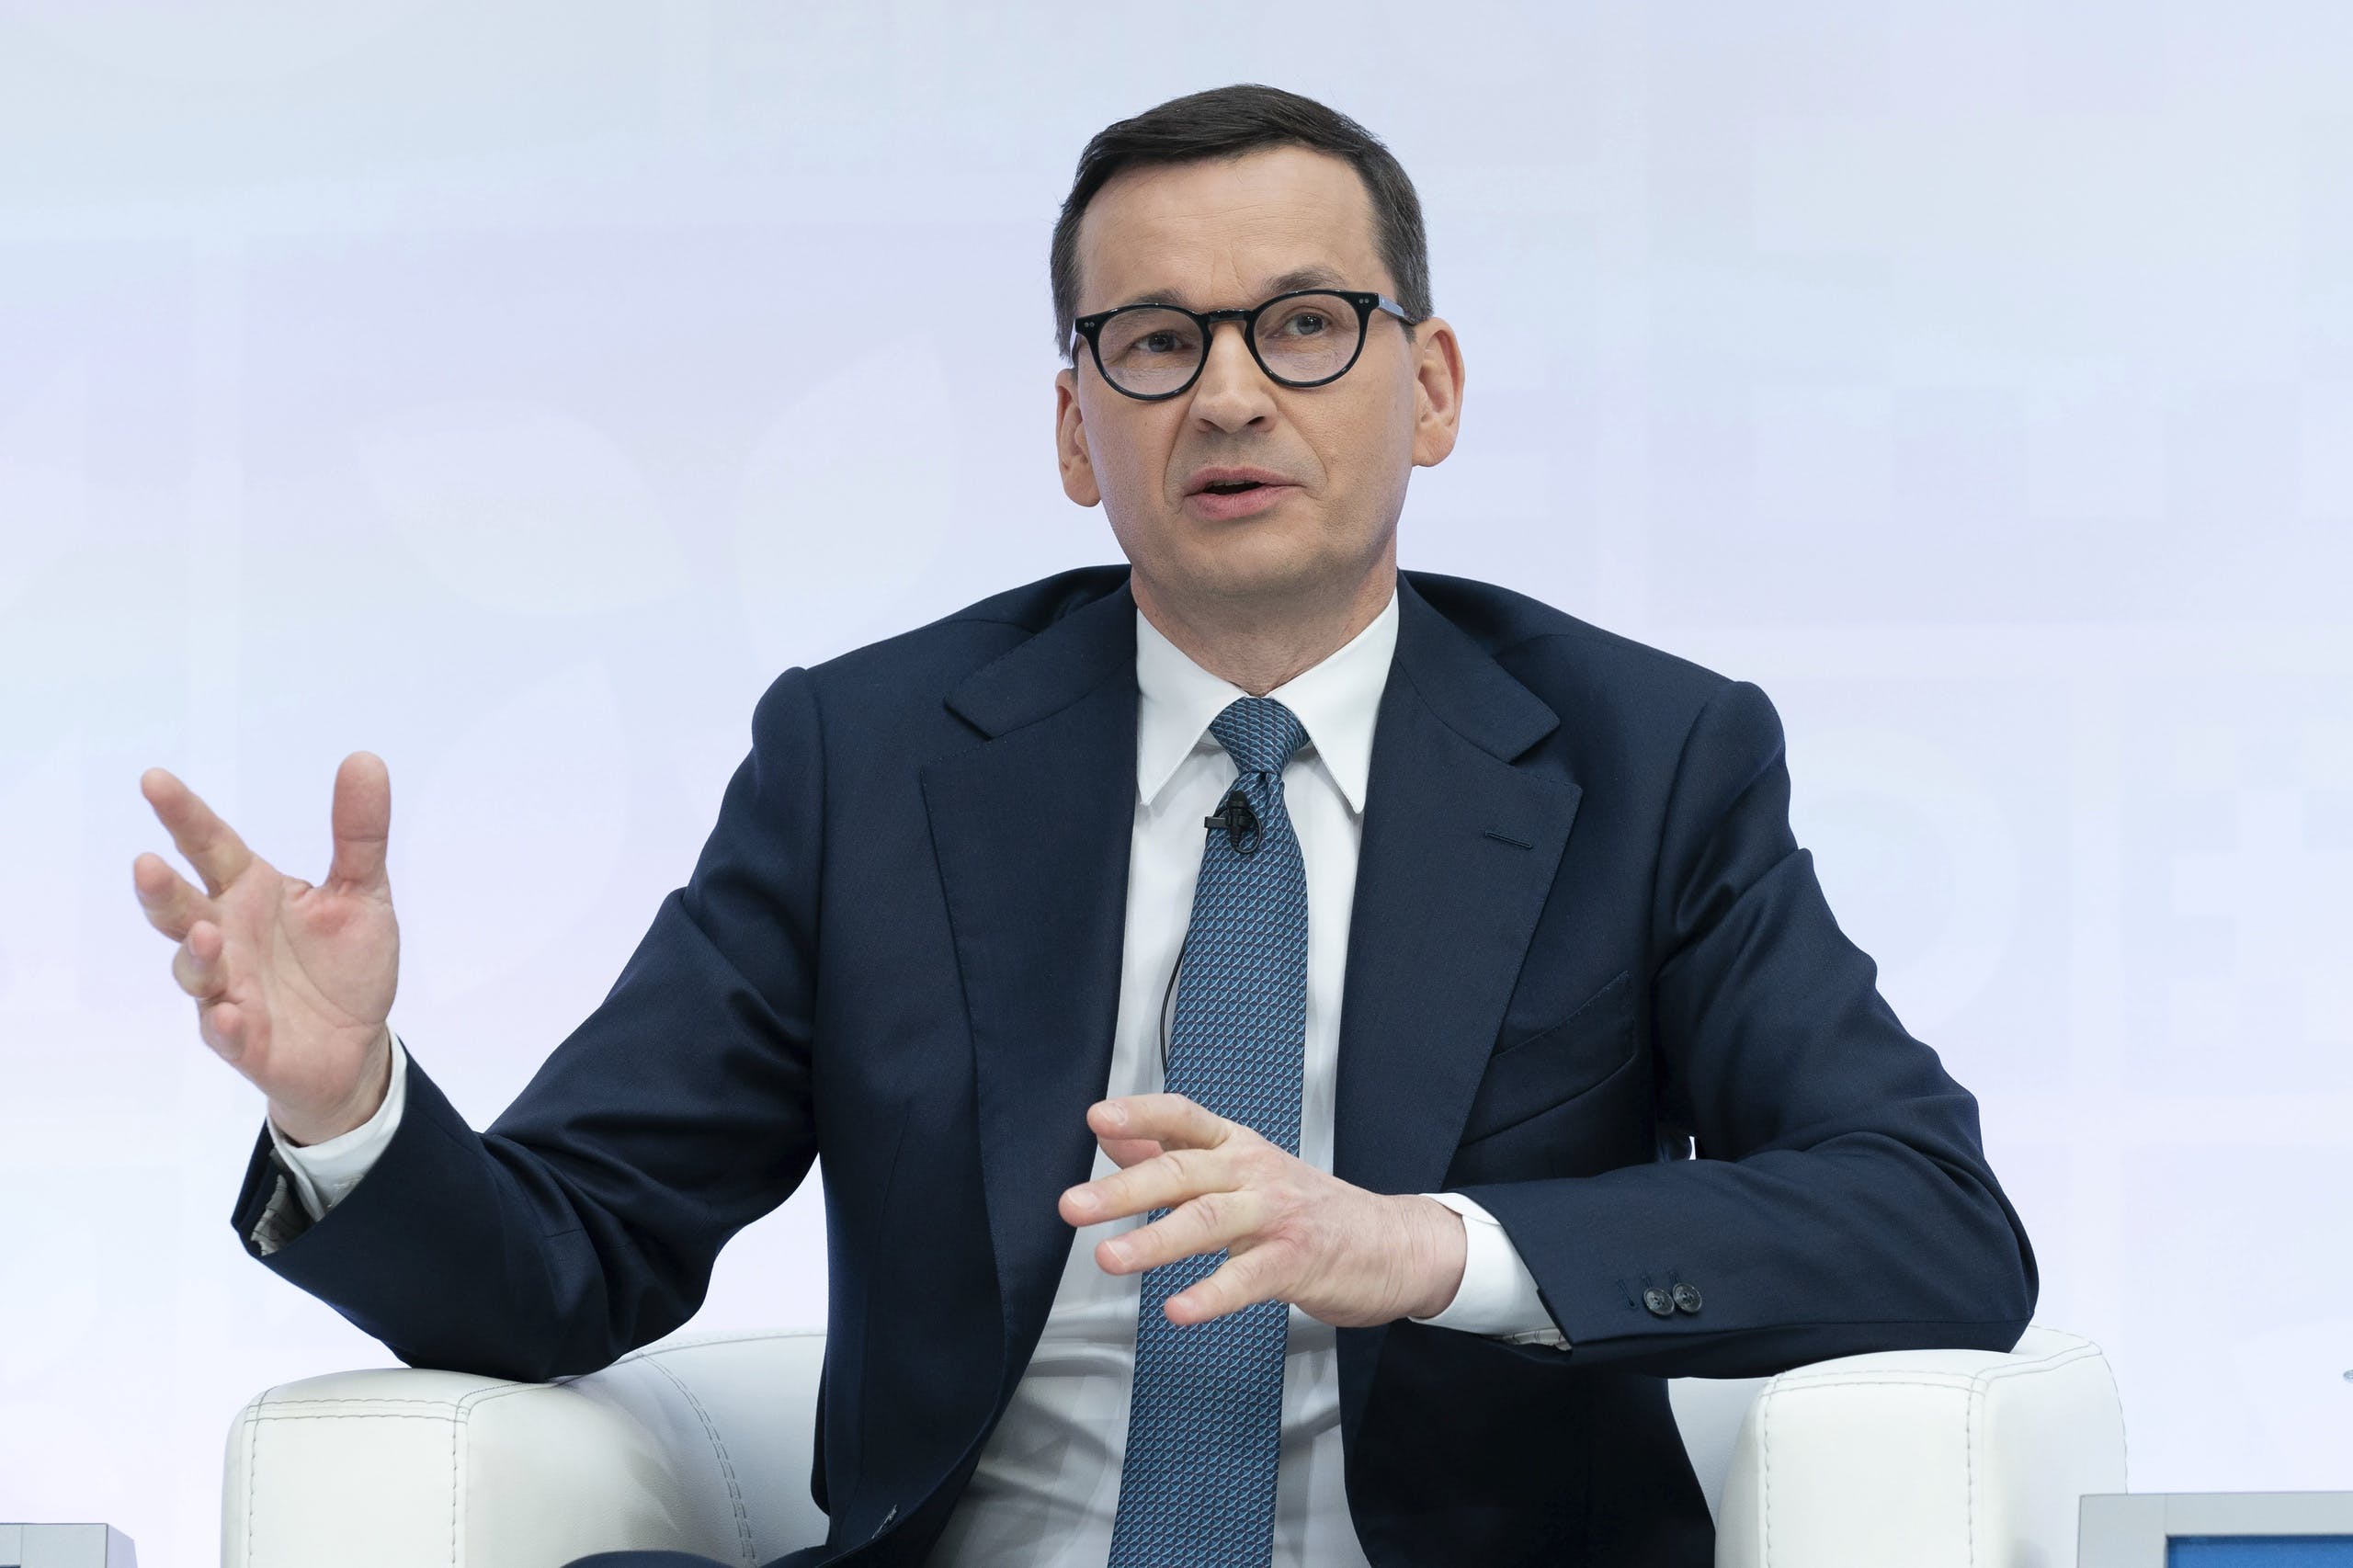 Polish Prime Minister: "European support for farmers comes too late"